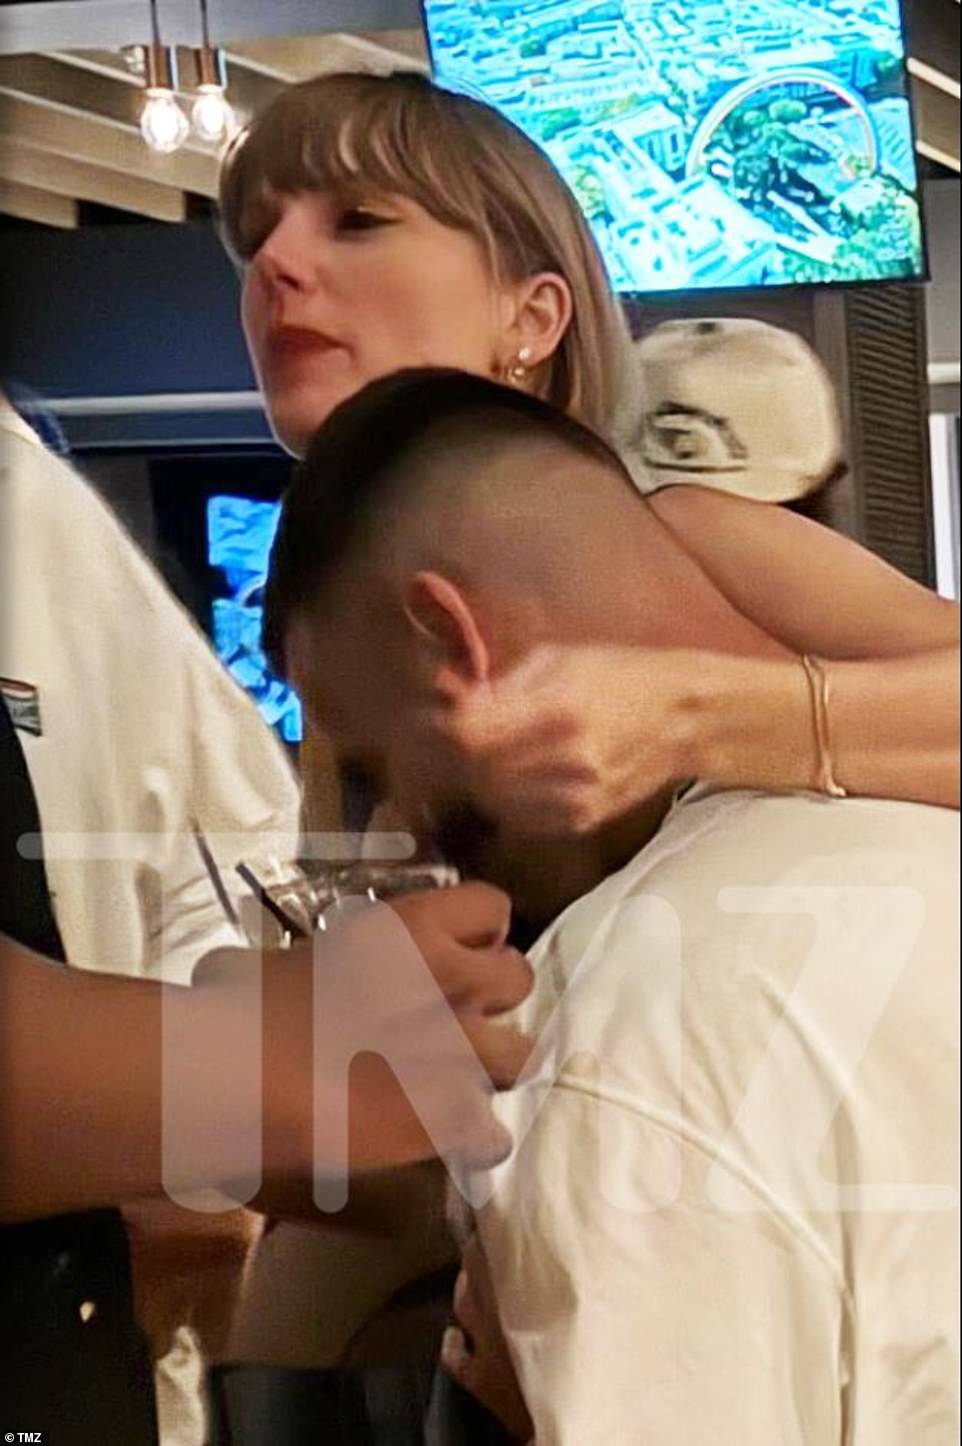 Cozying up: The pair were seen last Sunday sharing a bit of affection as they spent time at the Kansas City restaurant in photos obtained by TMZ